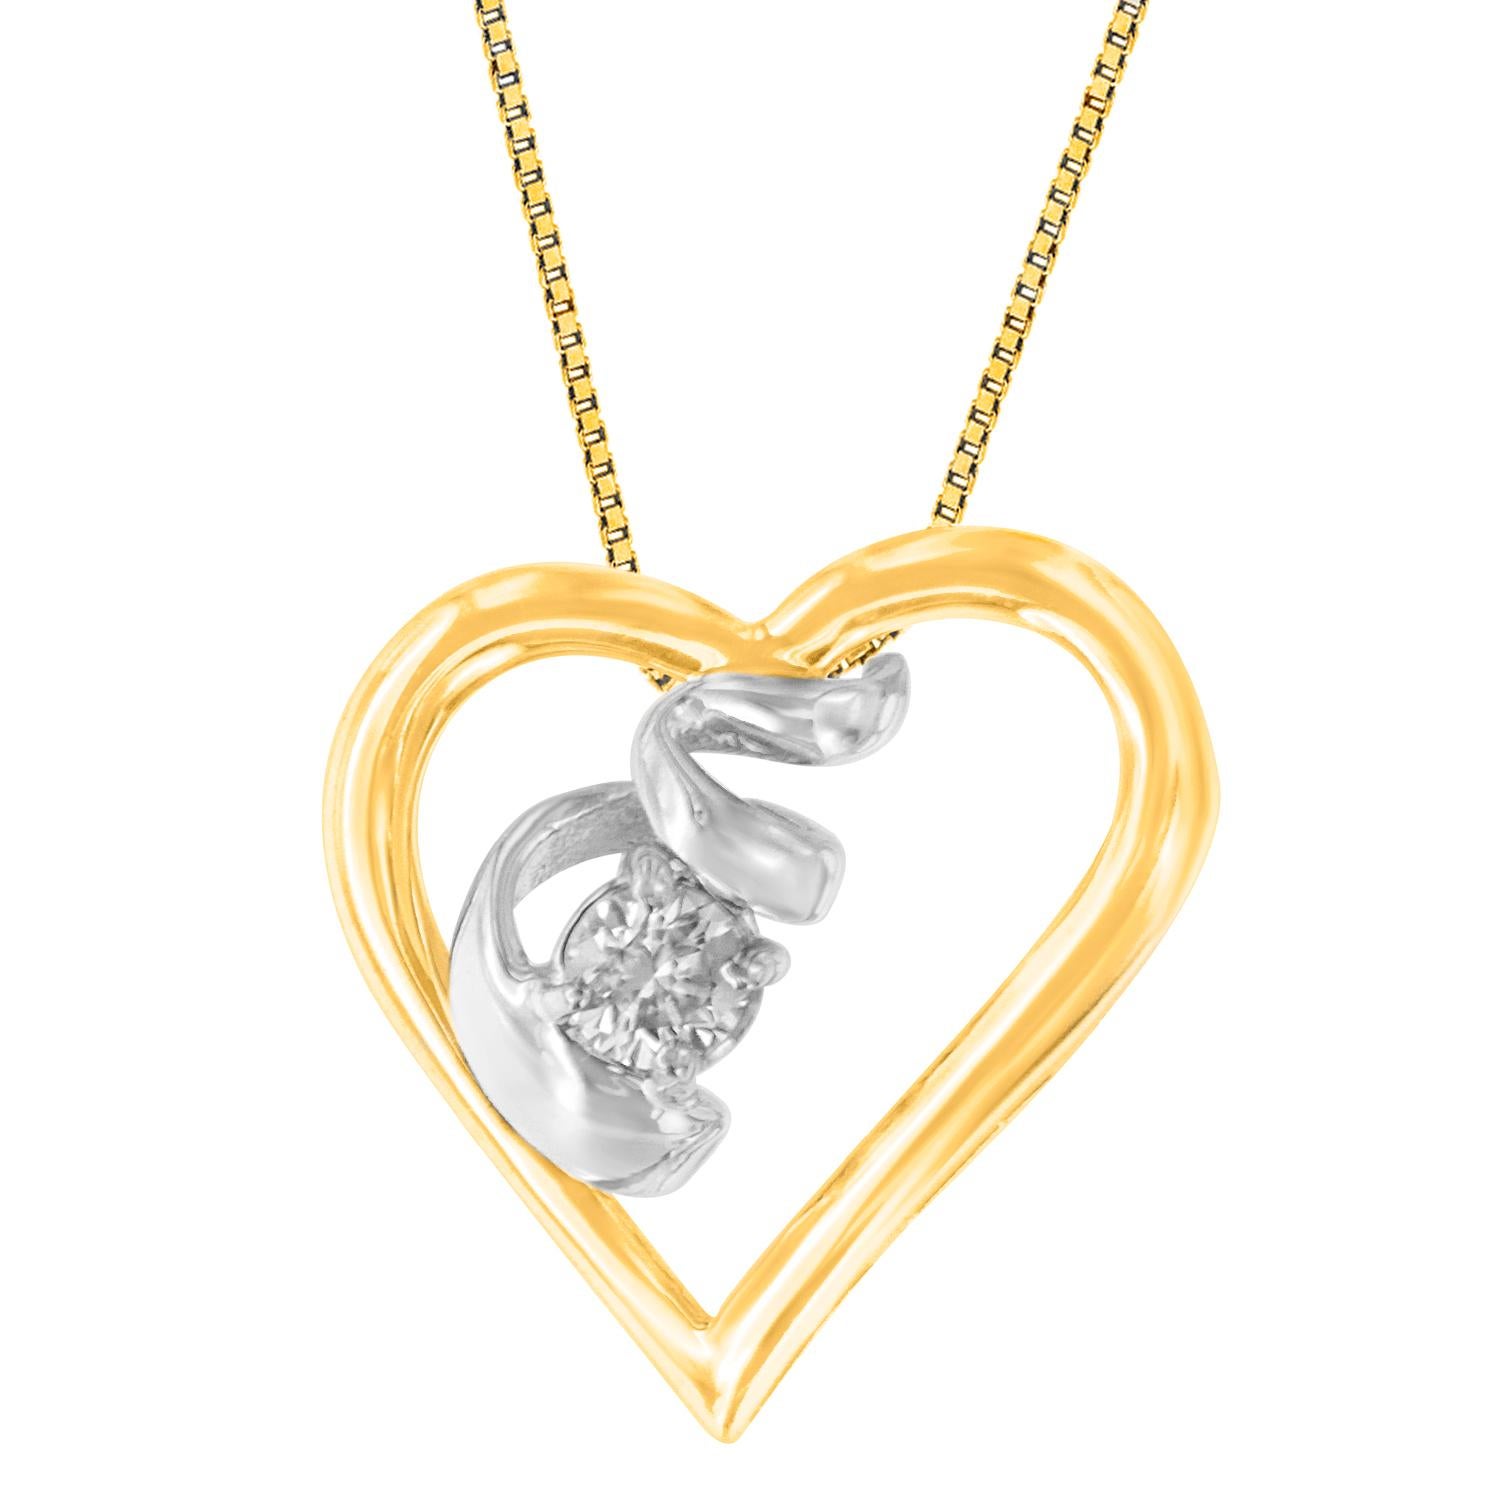 Capture the timeless essence of eternal love with our meticulously crafted yellow gold heart pendant. This exquisite piece features an intricate spiral design at its center, embellished with a radiant diamond that symbolizes the everlasting bond of